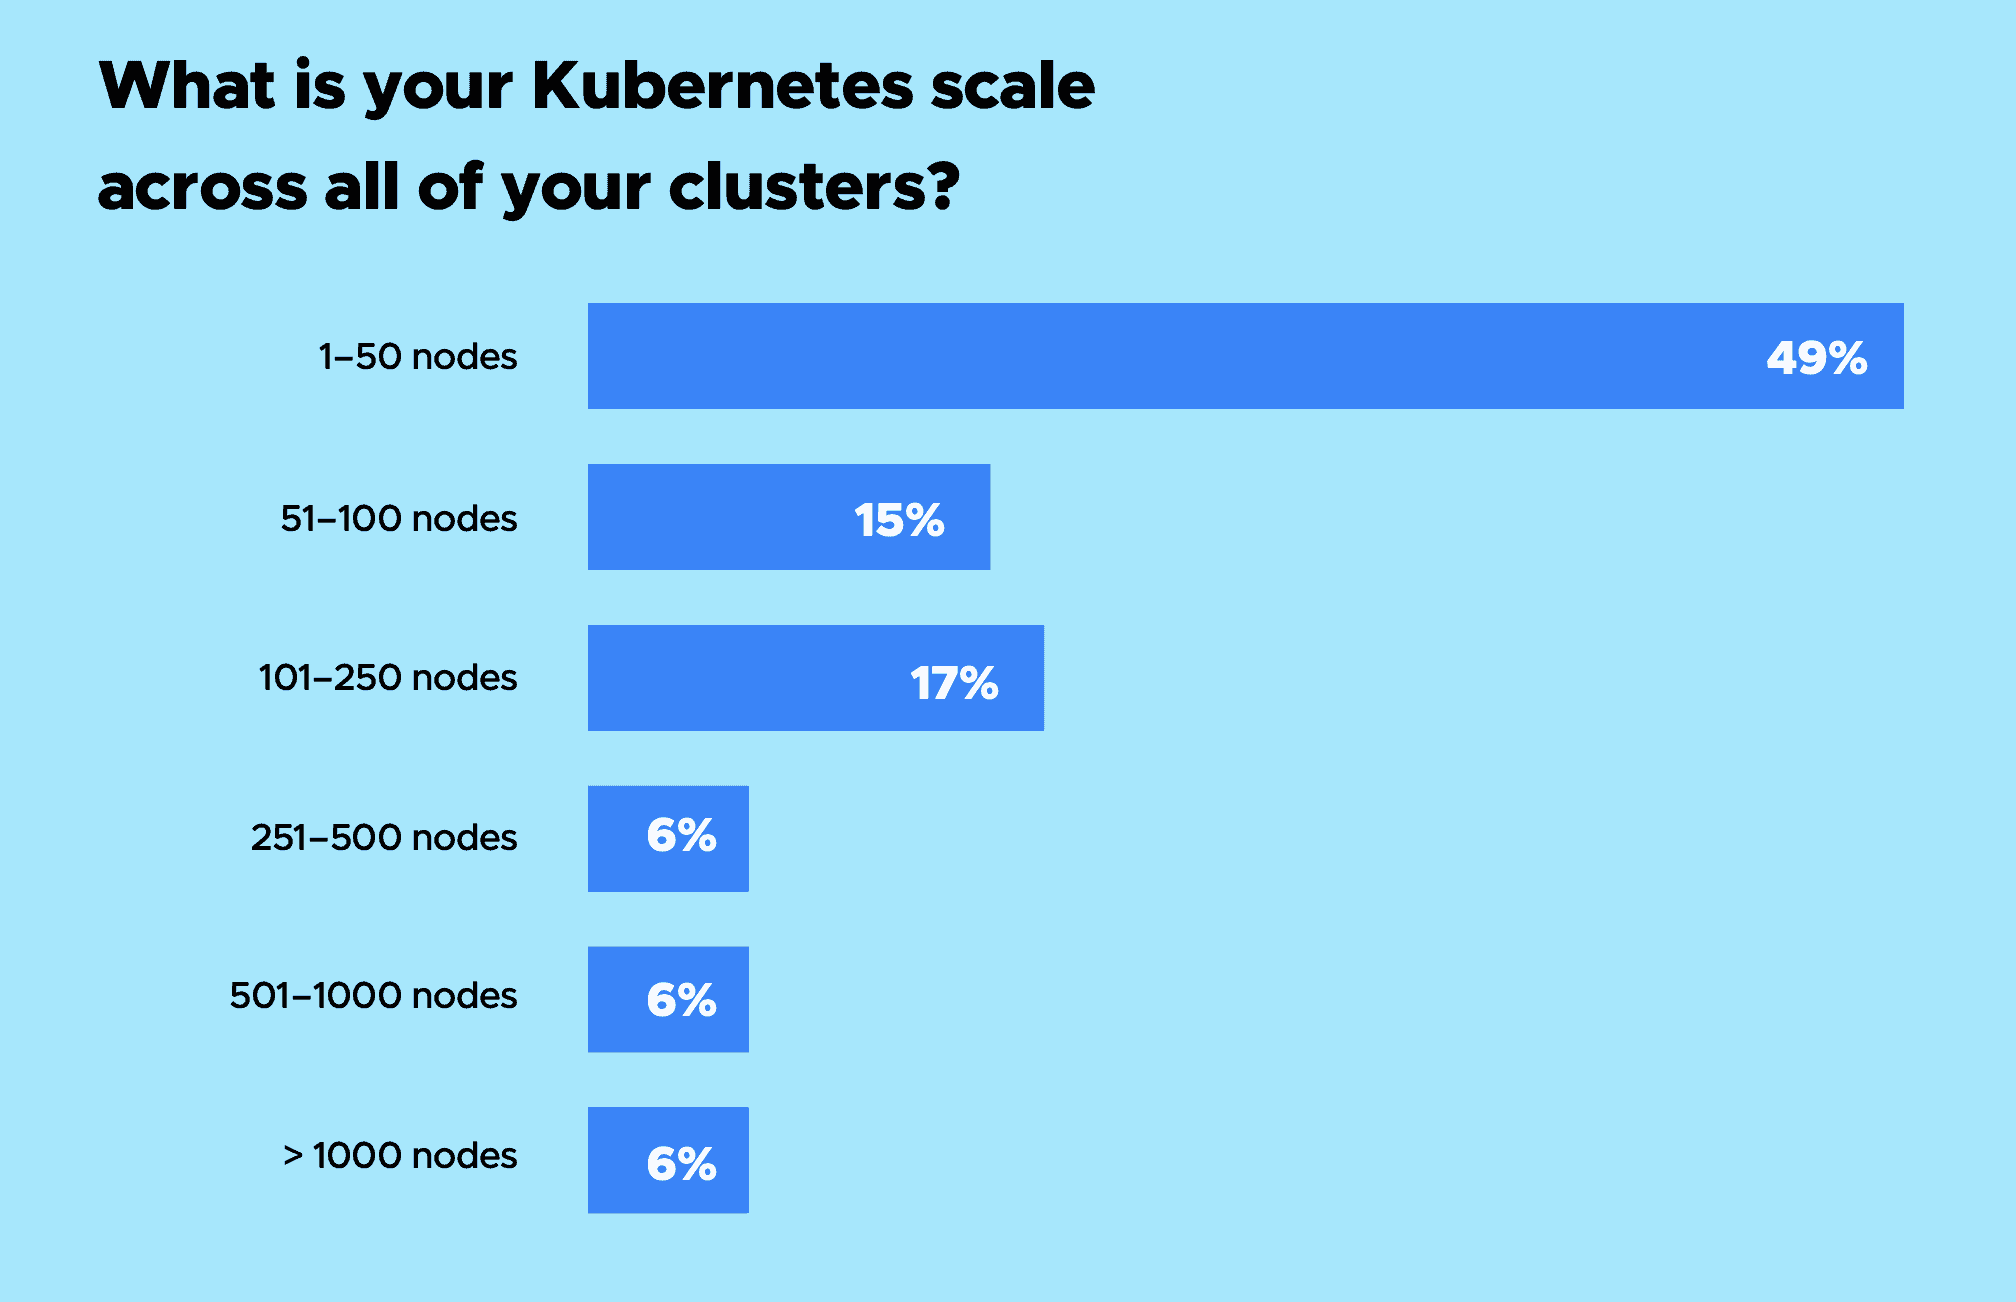 Bar chart showing respondent's answers for "What is your Kubernetes scale across all of your clusters?" 49% of the respondents chose 1-50 nodes